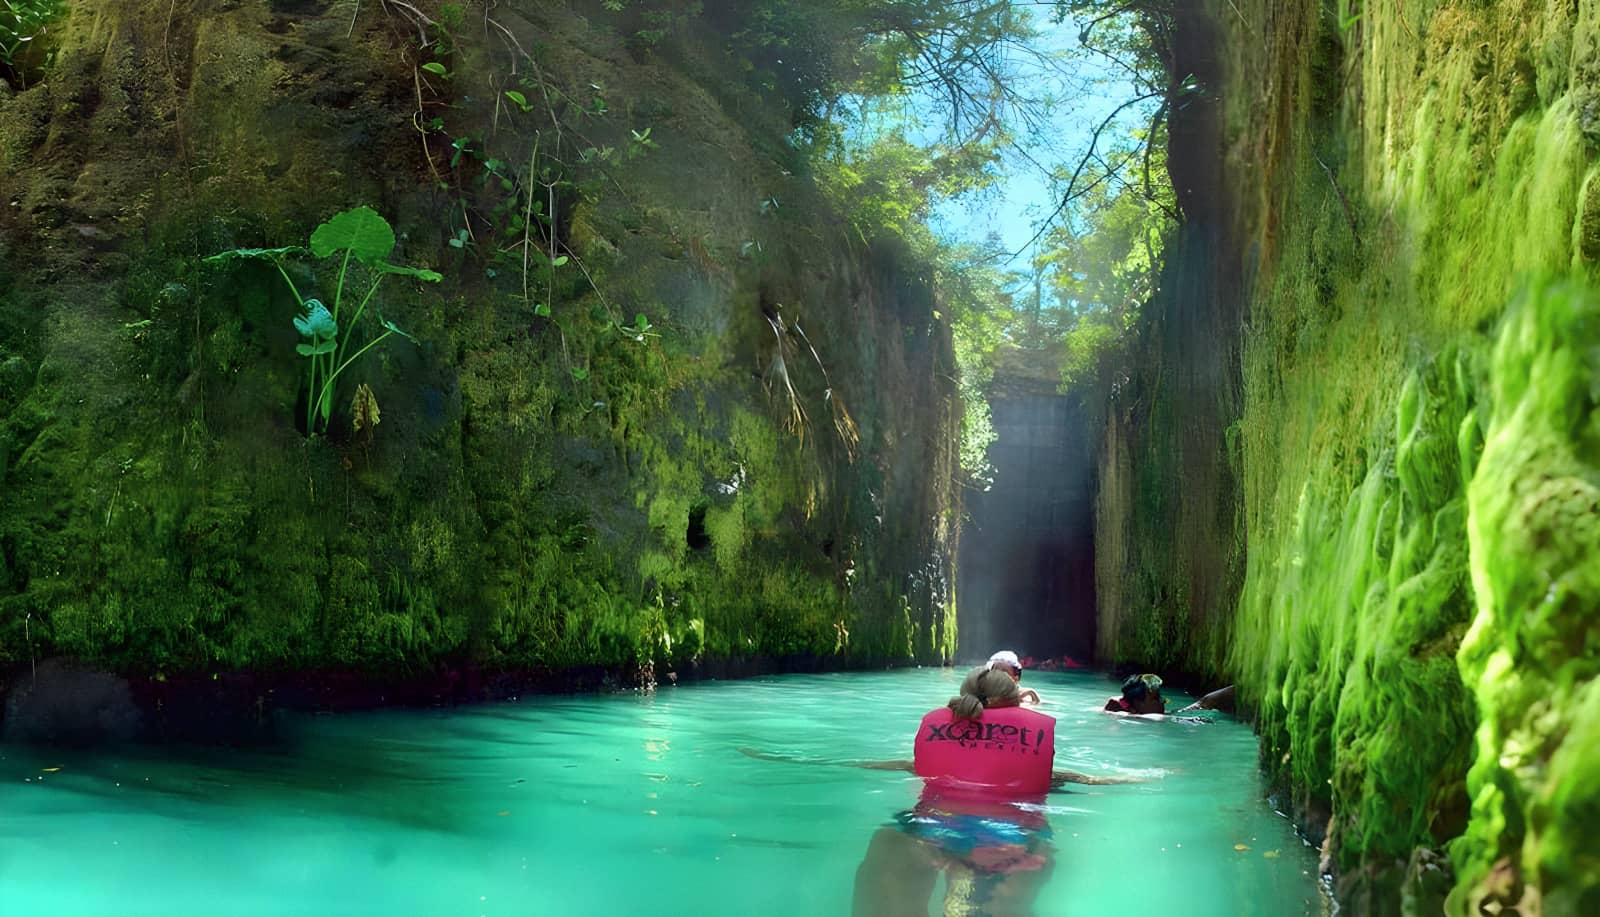 Subterranean river. People floating with vests.